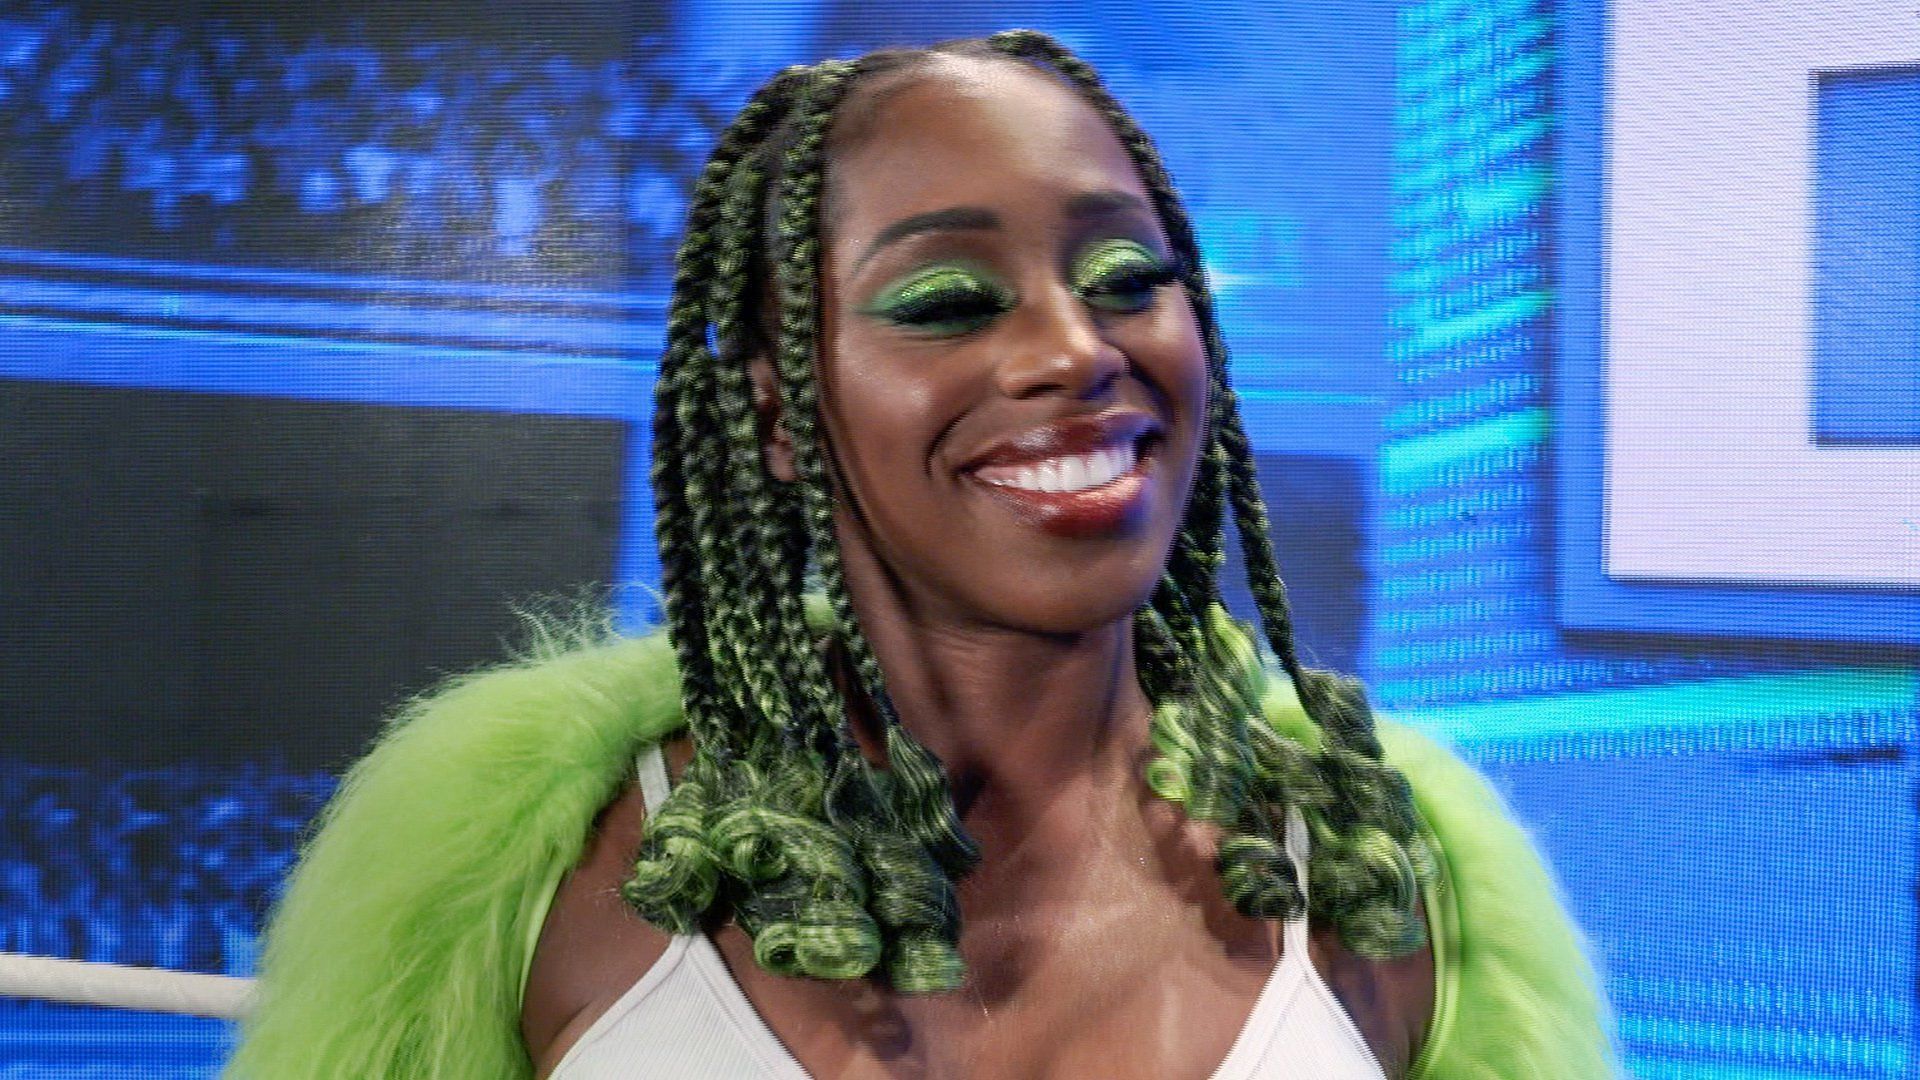 Naomi came back to WWE a few months ago